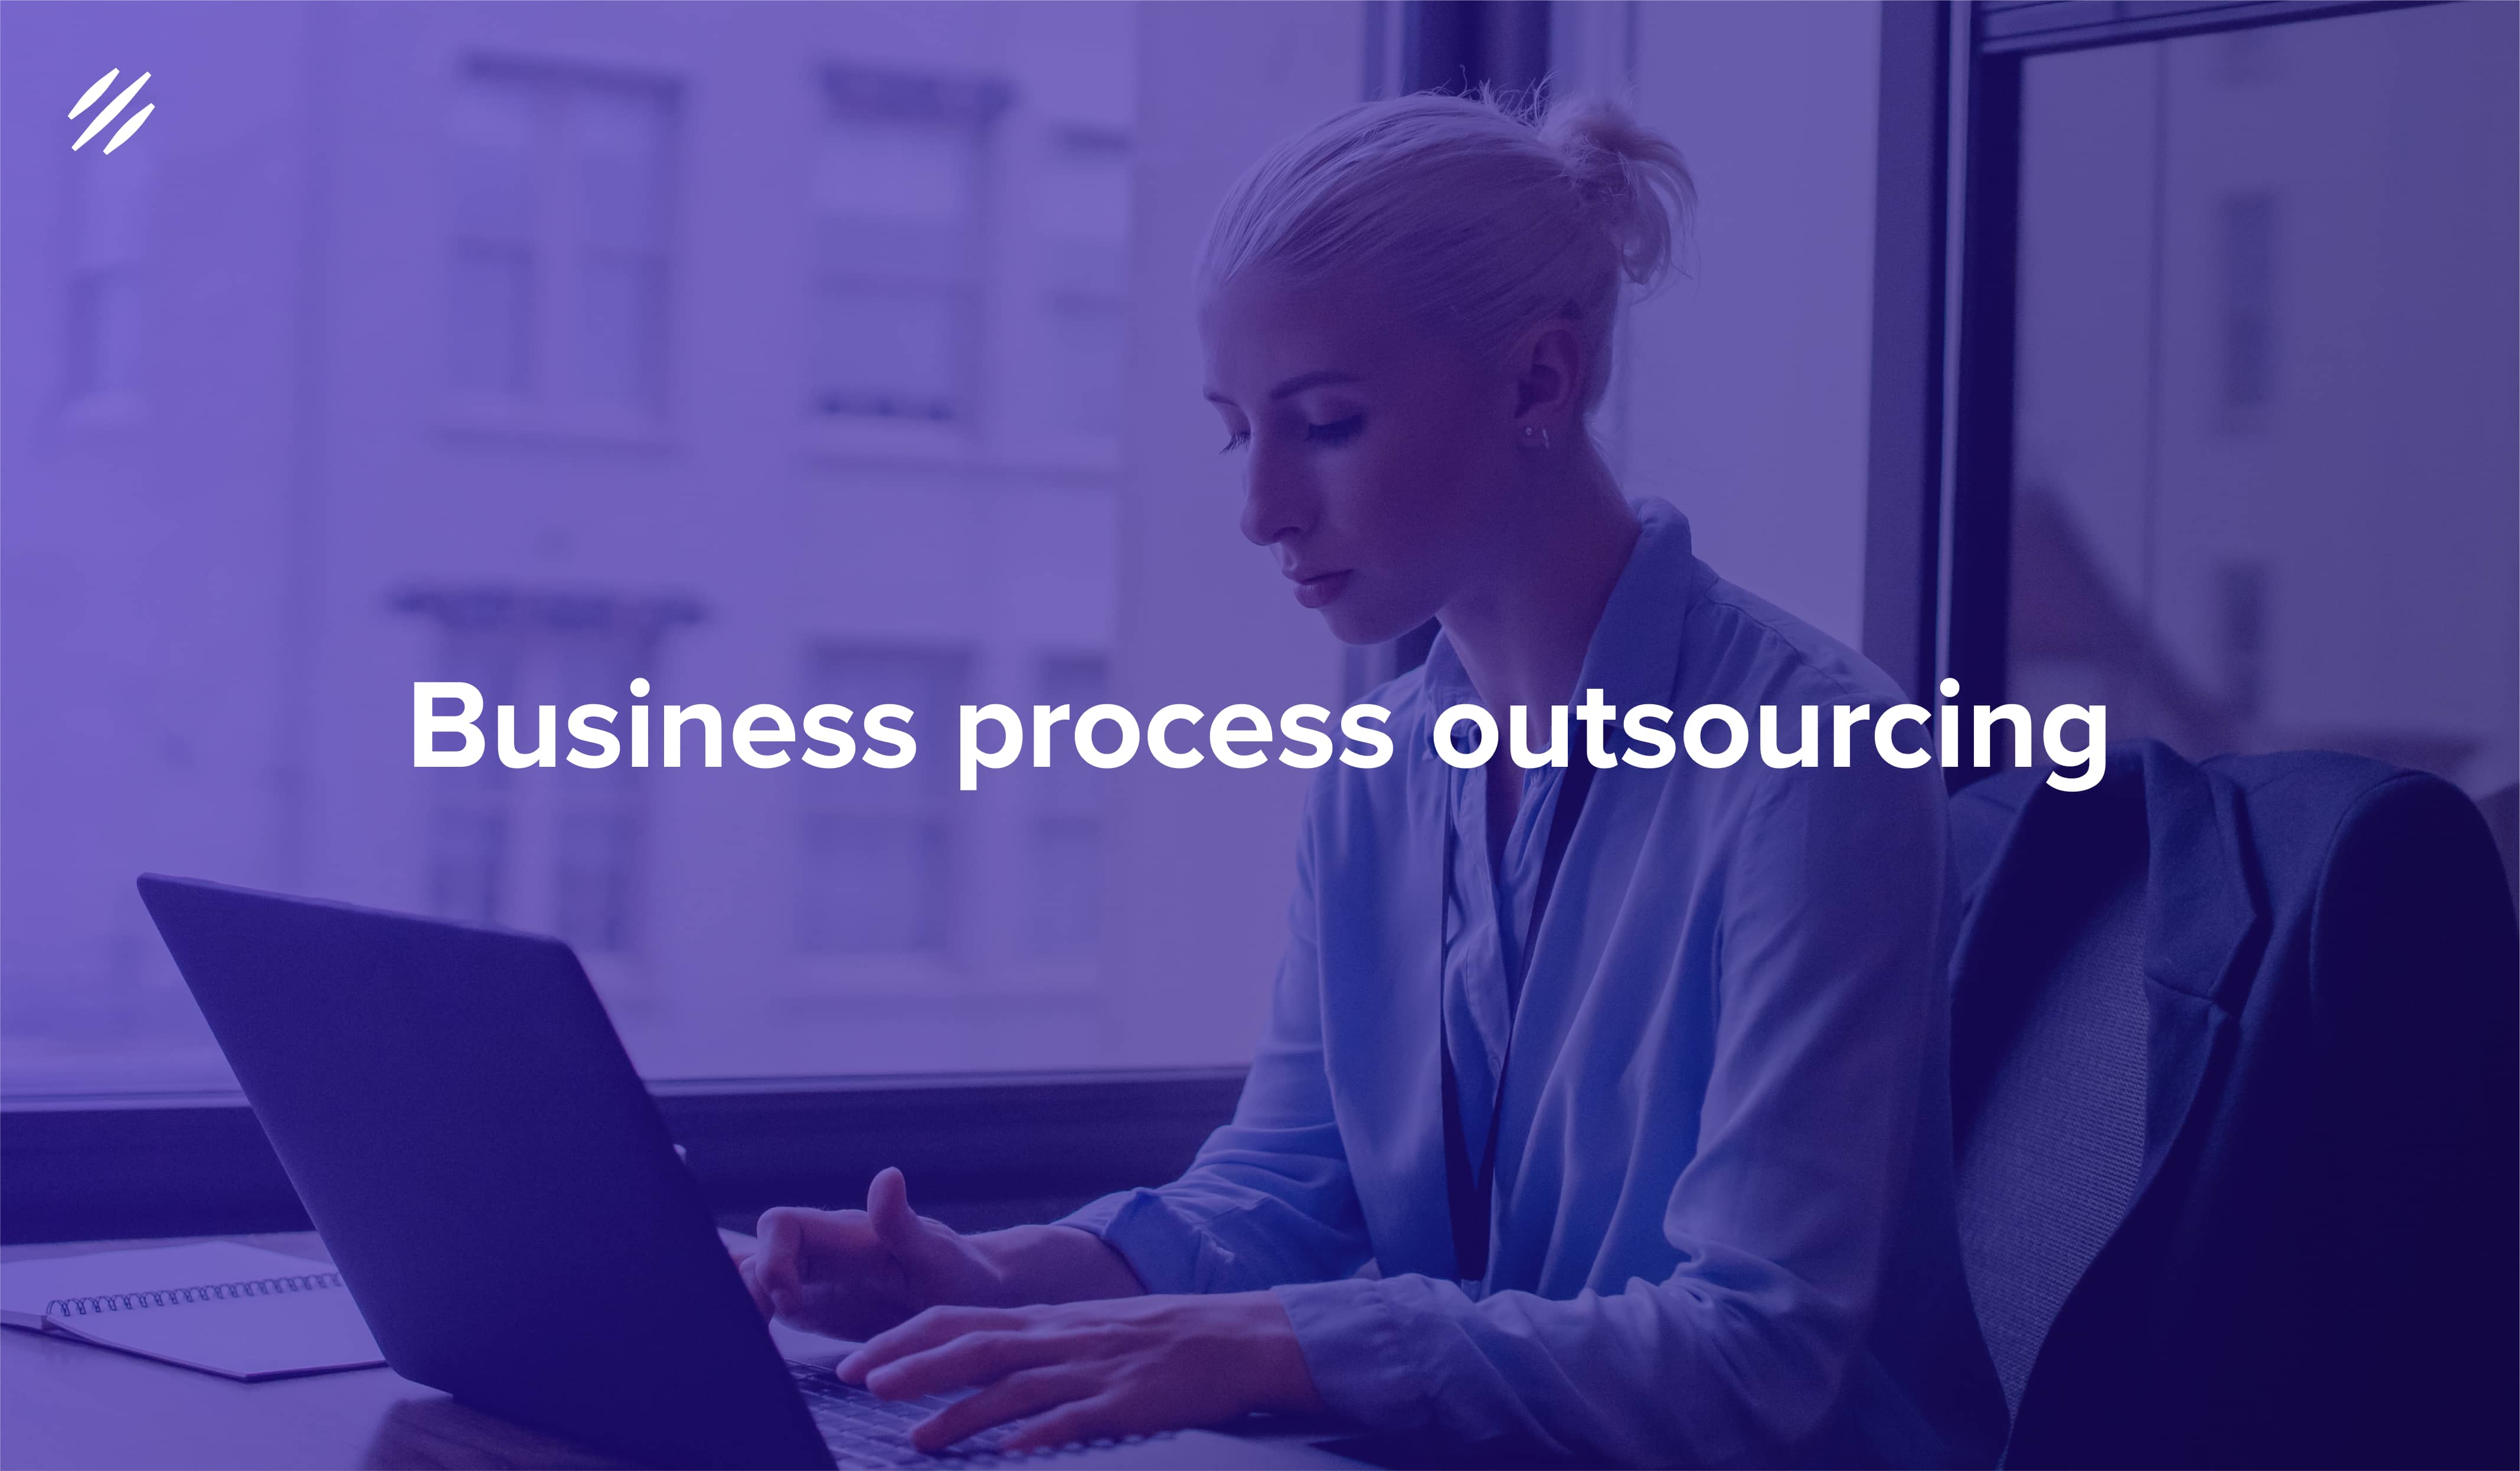 What Is Business Process Outsourcing and What Are Its Benefits?